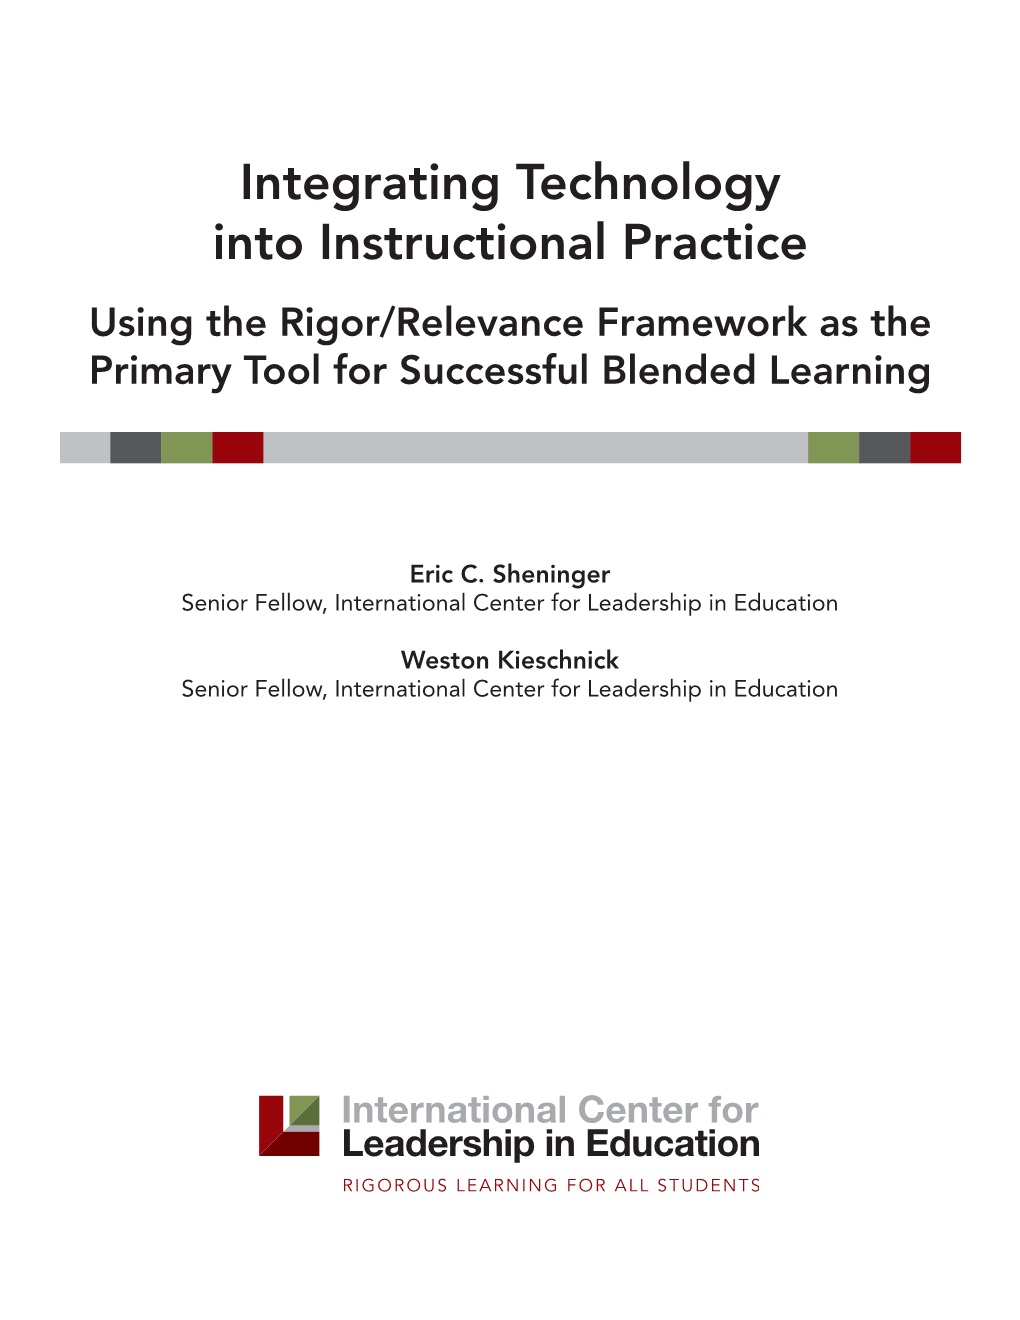 Integrating Technology Into Instructional Practice Using the Rigor/Relevance Framework As the Primary Tool for Successful Blended Learning